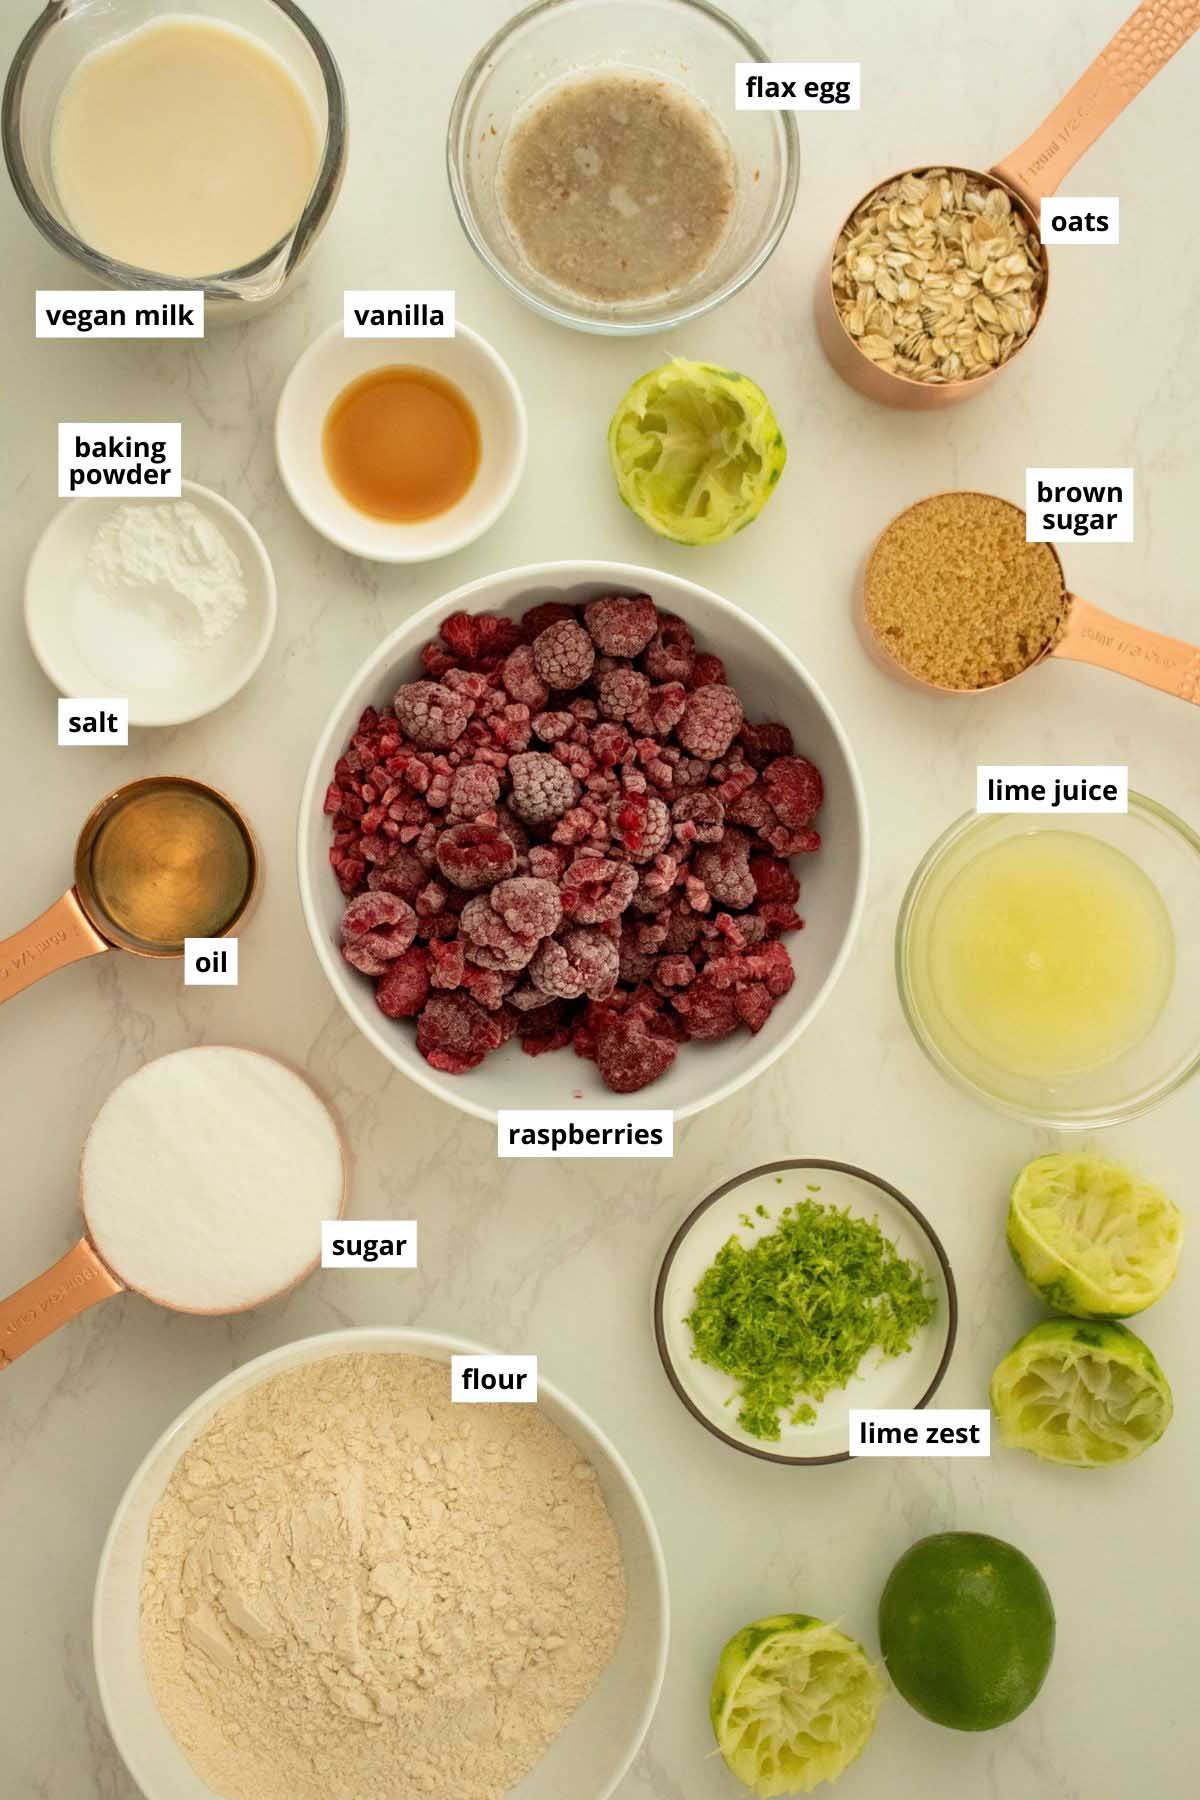 image collage showing raspberries, lime juice and zest, and other muffin ingredients in bowls on a white table